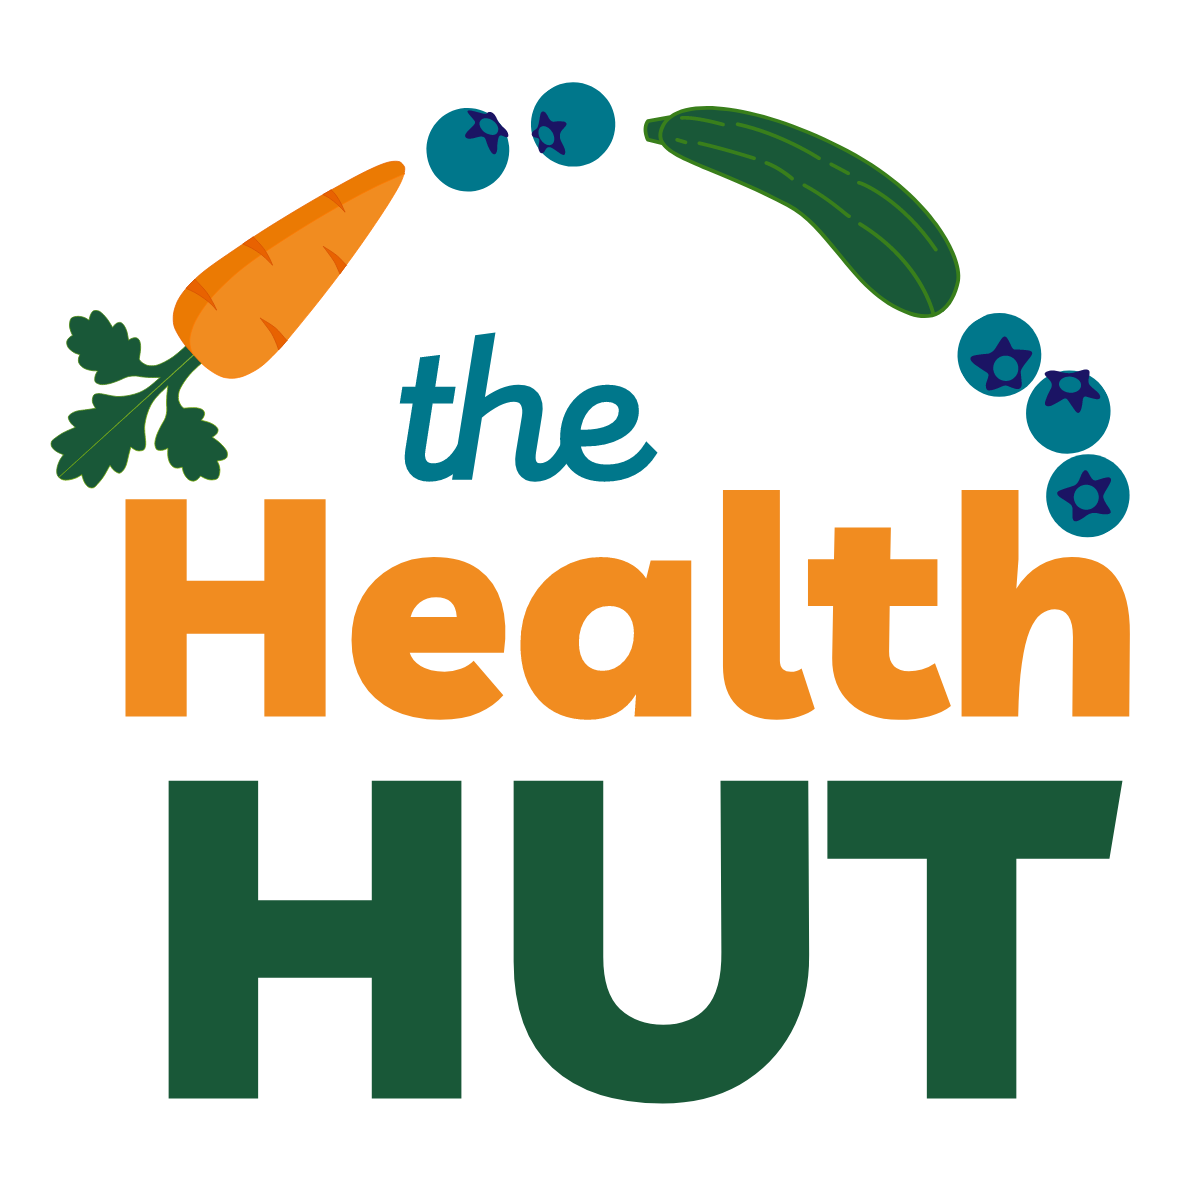 health hut at cabin cafe healthy community collaborative